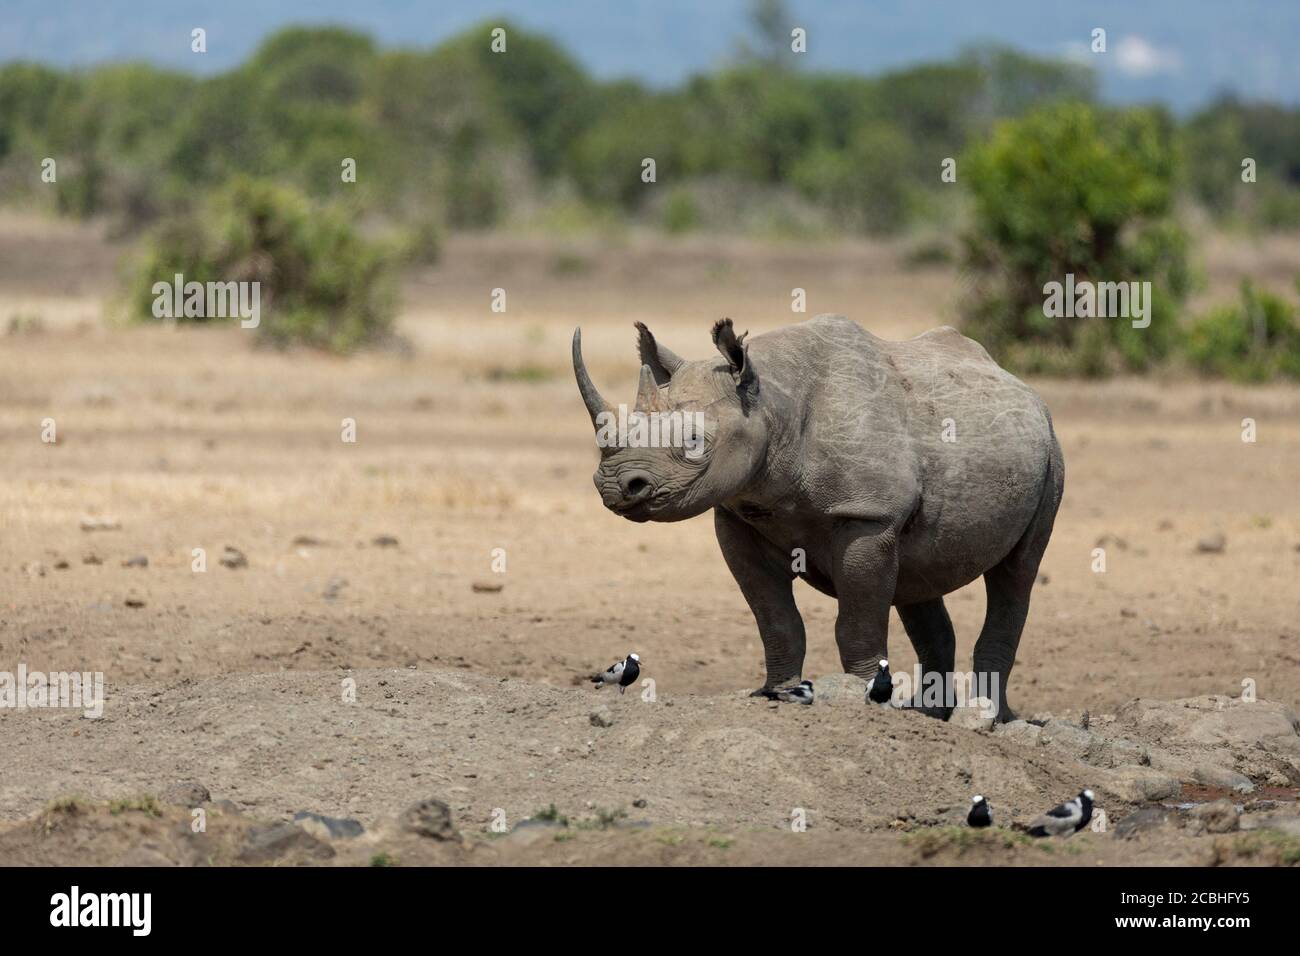 Adult black rhino full body horizontal portrait with pointy ears and big horn in Ol Pajeta Reserve in Kenya Stock Photo